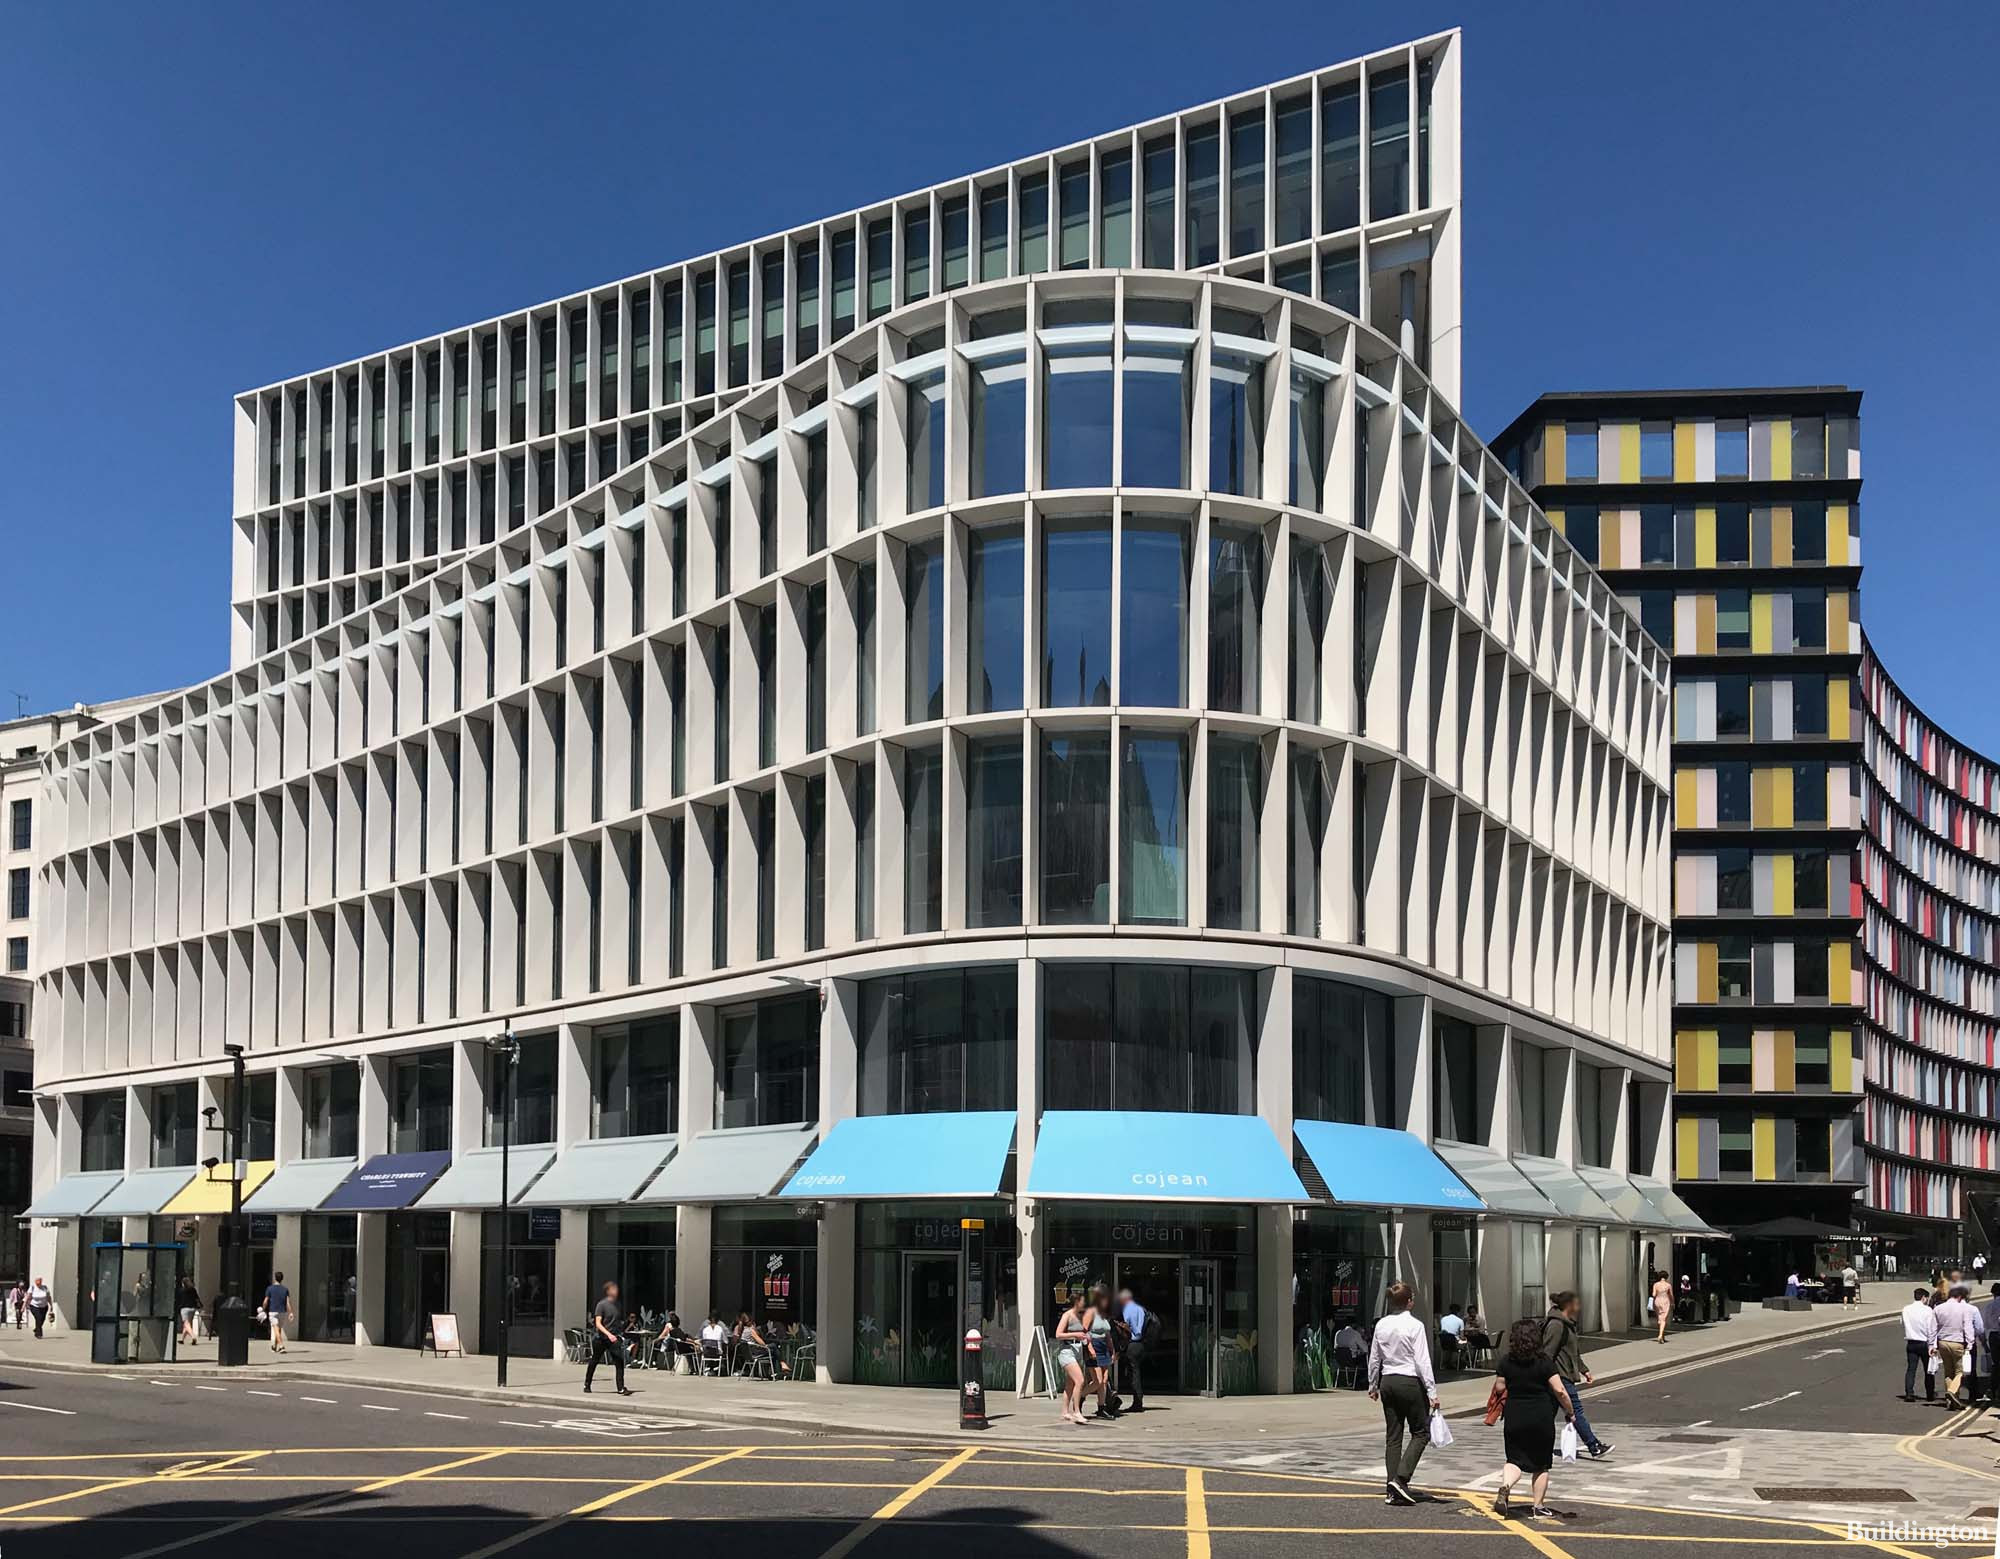 1 & 2 New Ludgate buildings designed by Fletcher Priest Architects.